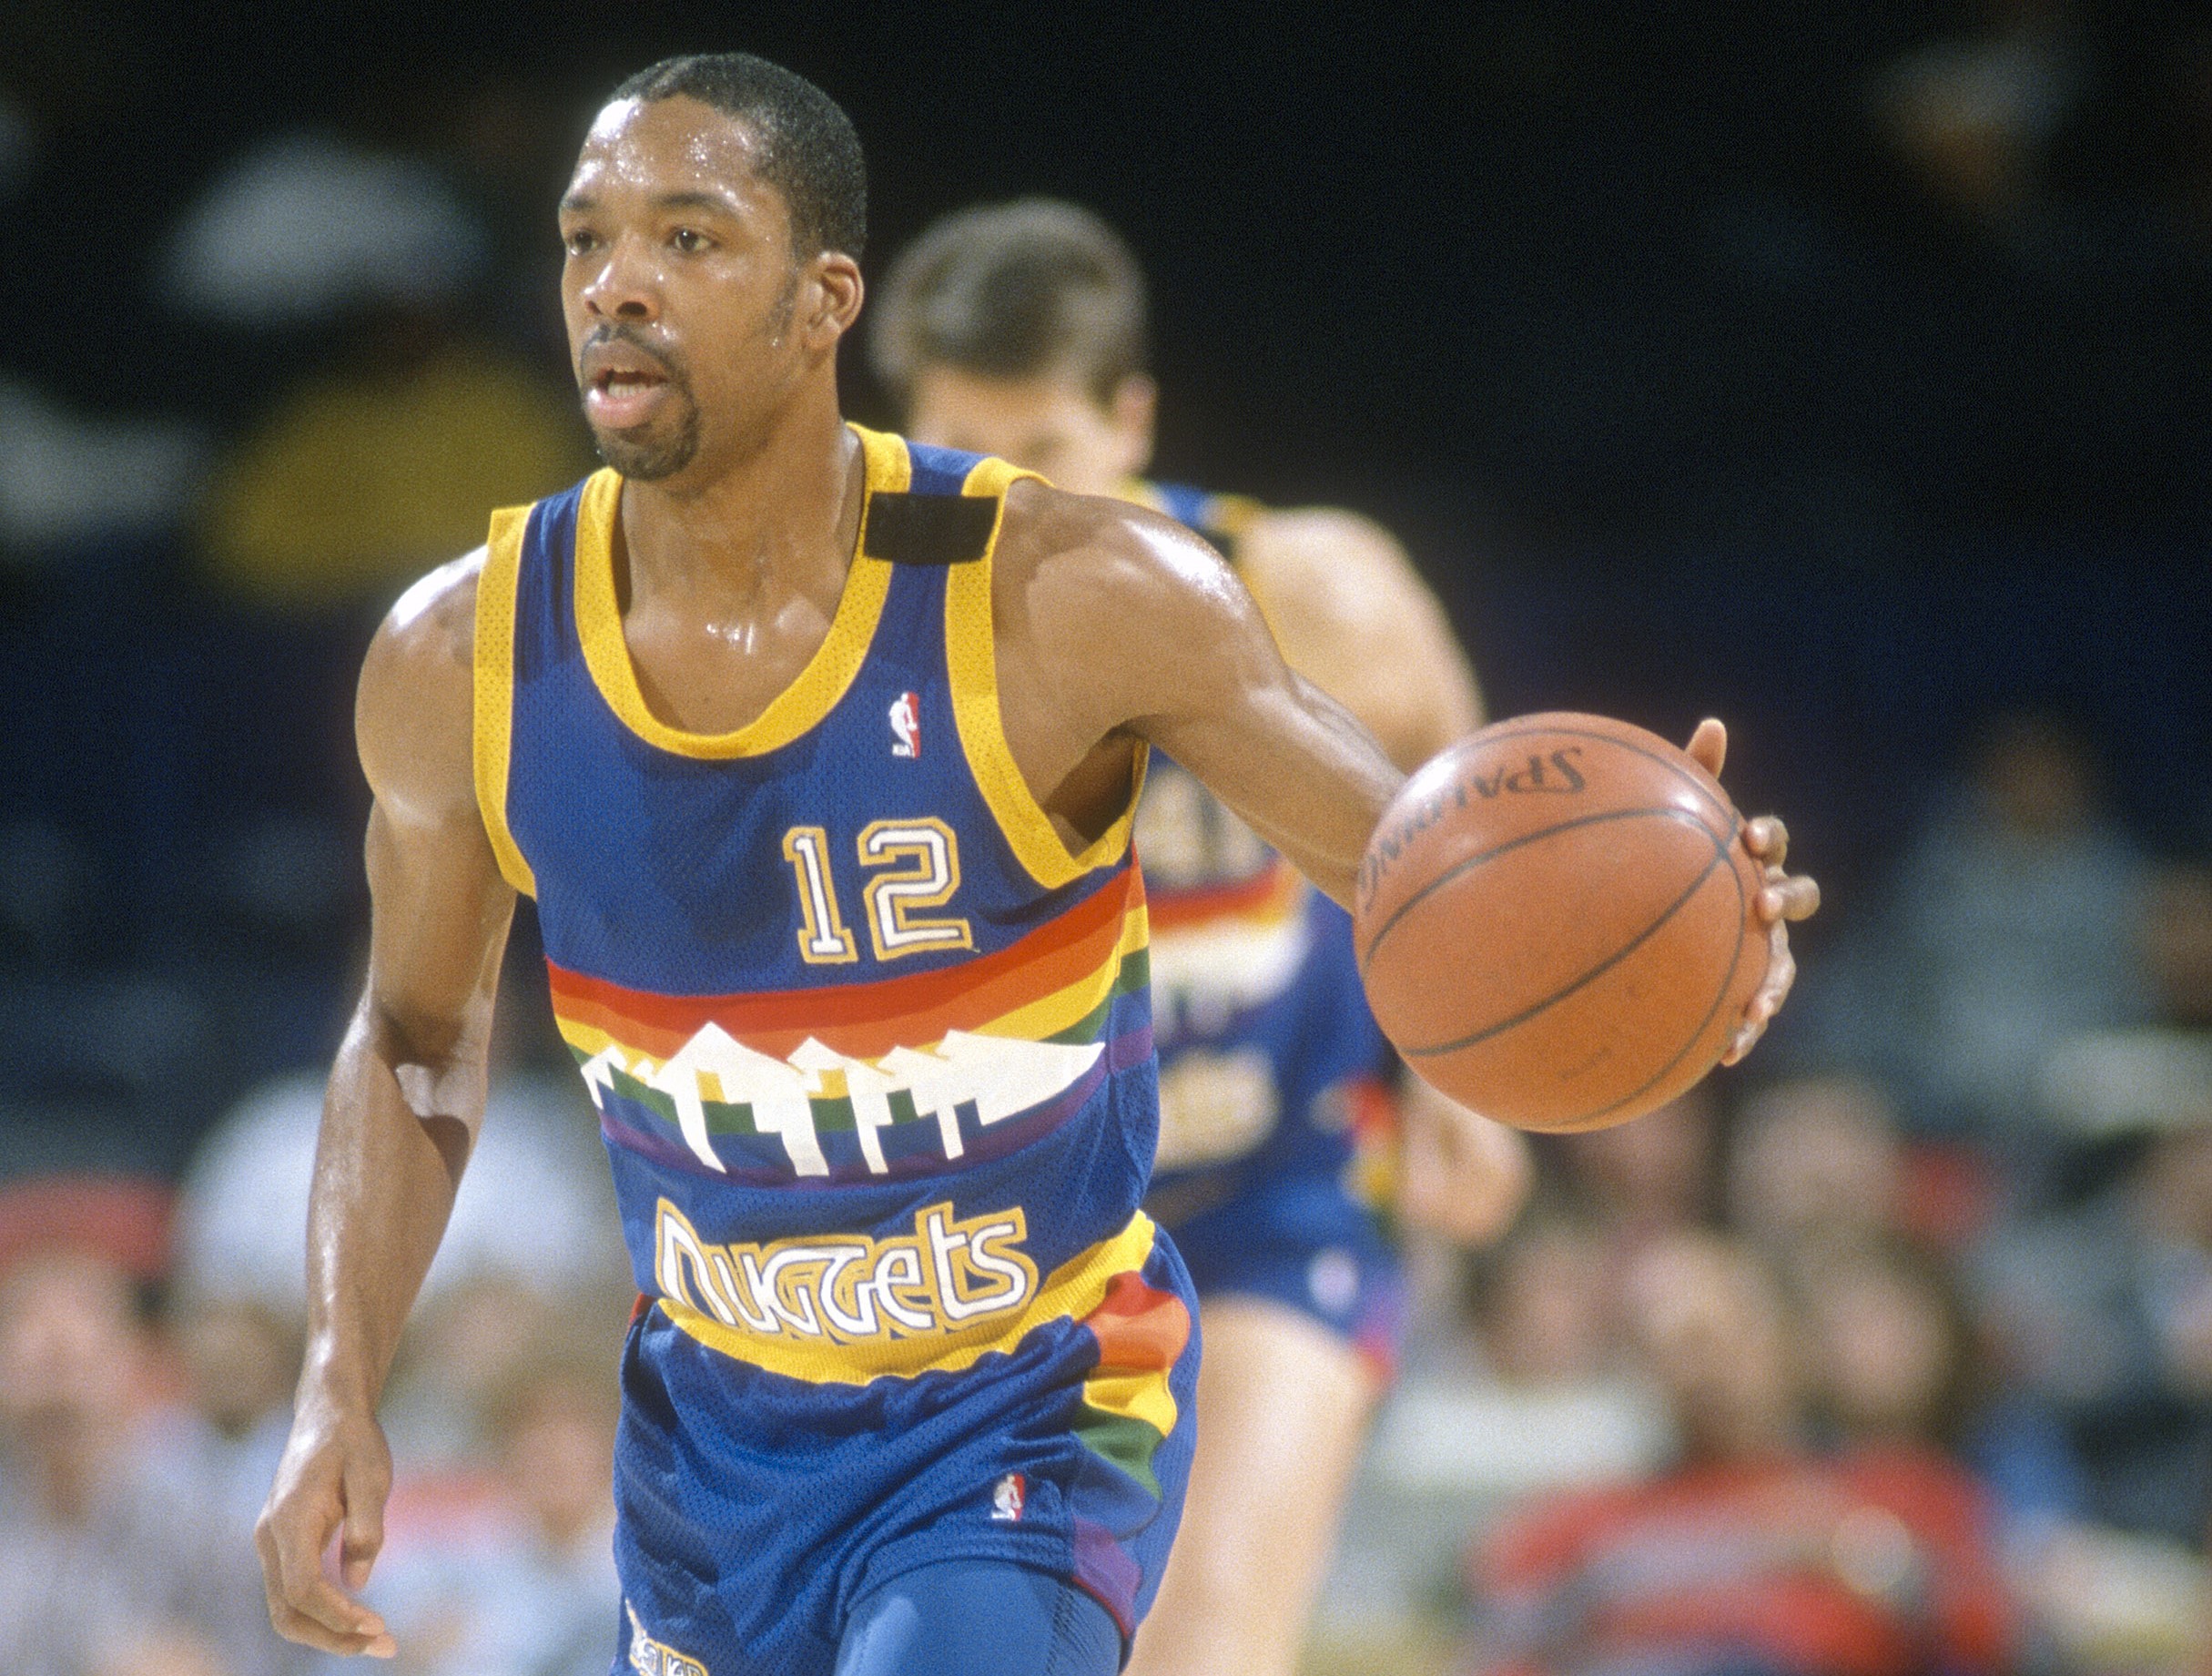 Fat Lever of the Denver Nuggets dribbles up the court.